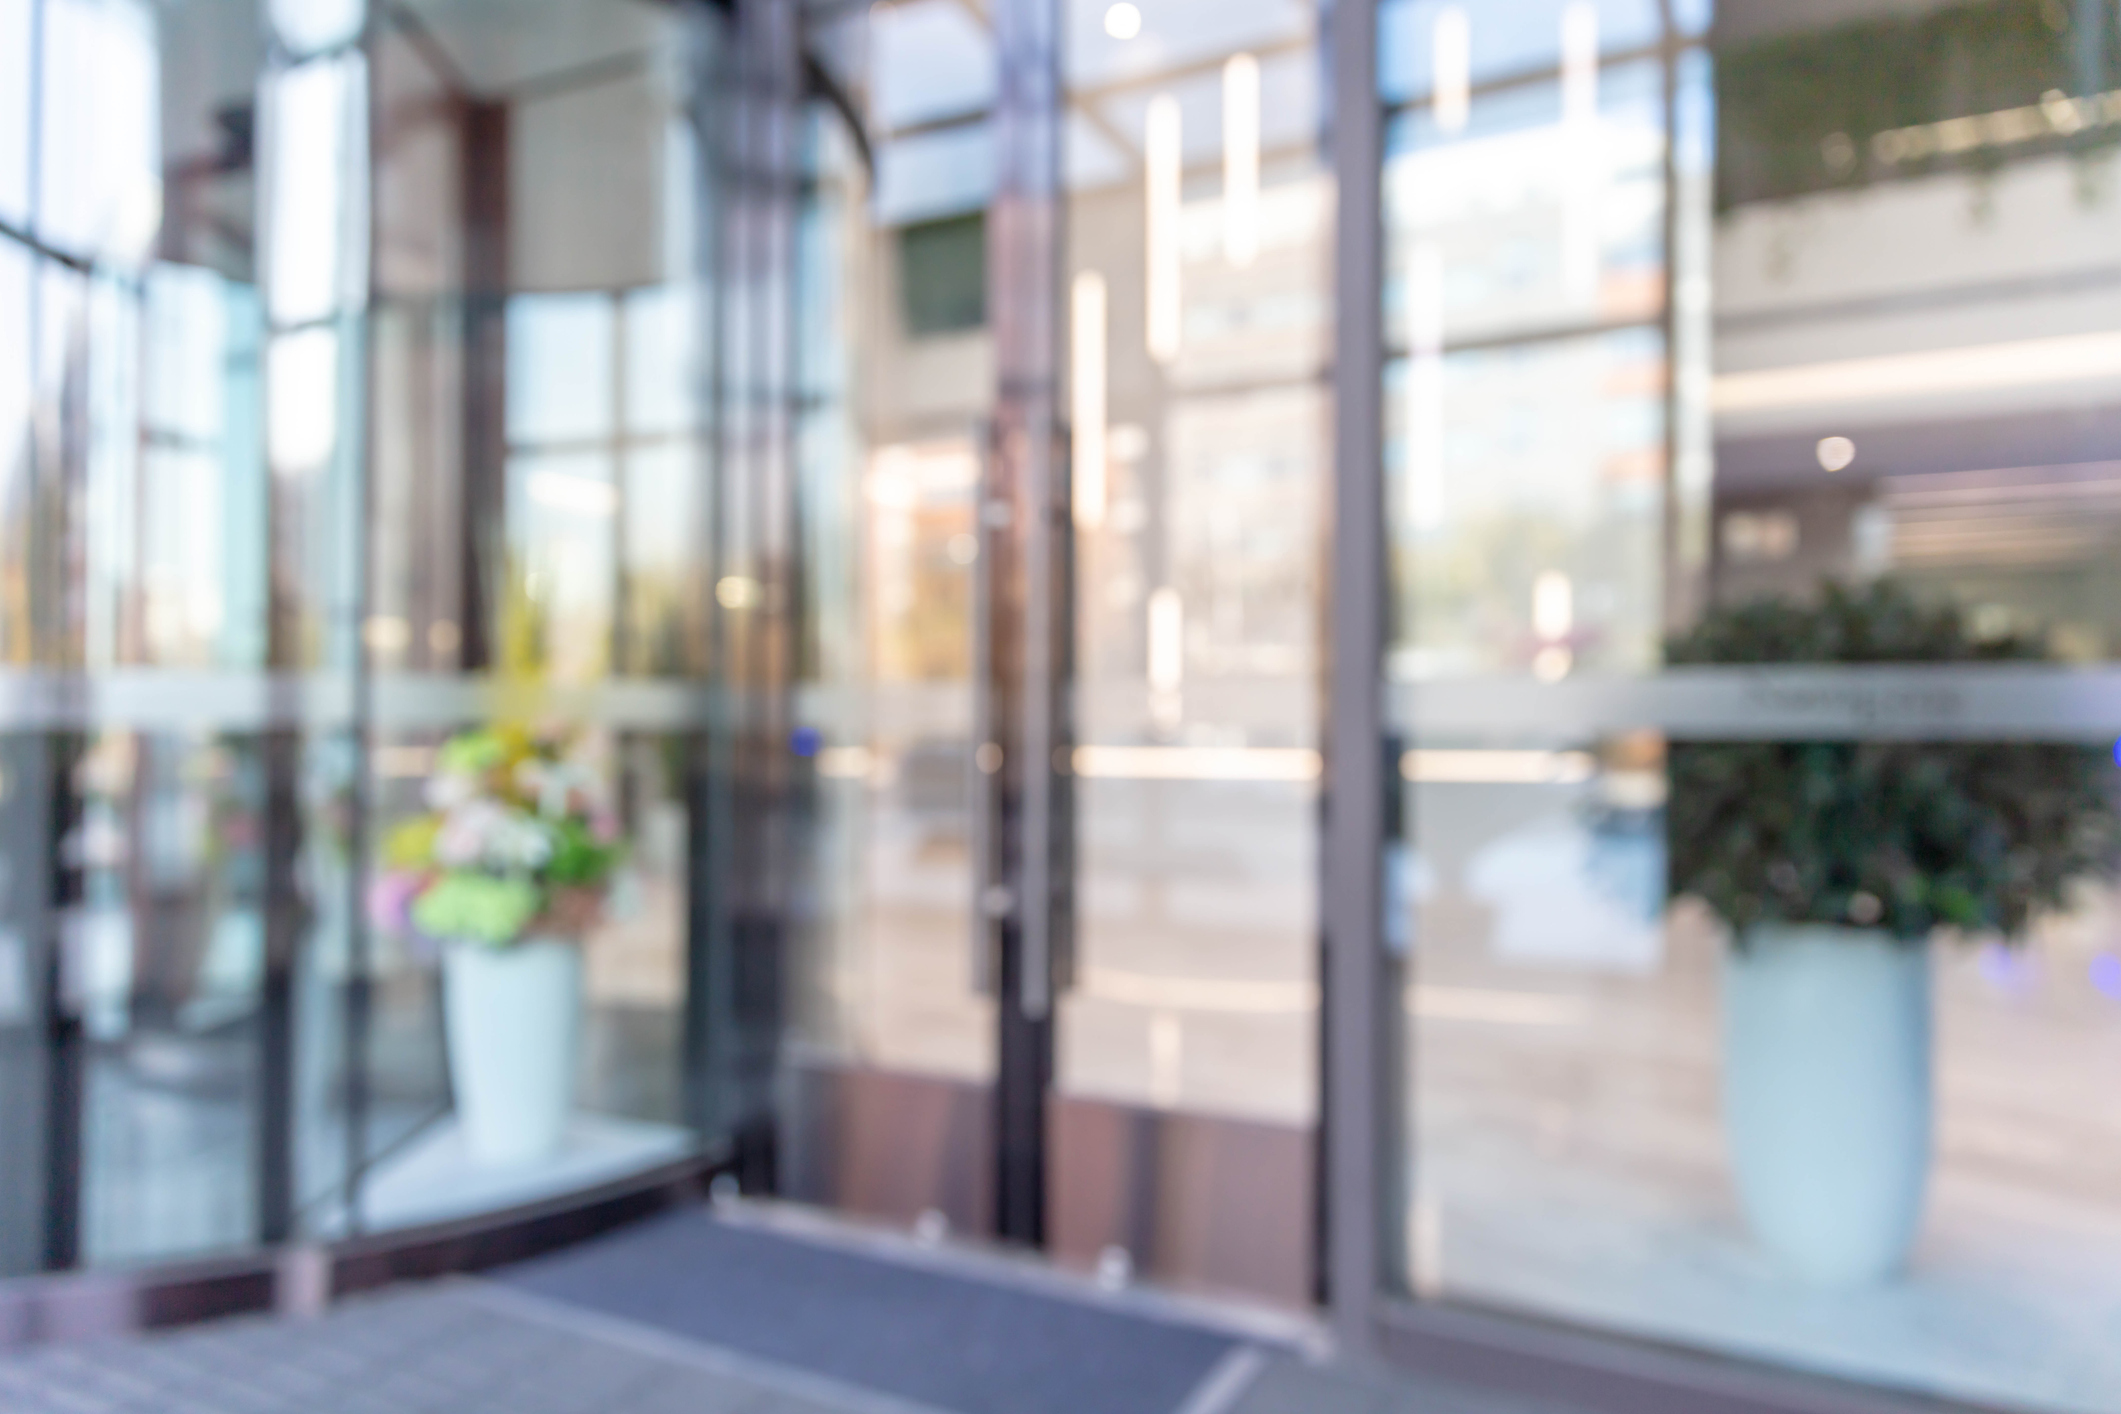 Defocused background effect of revolving doors at the entrance of a building